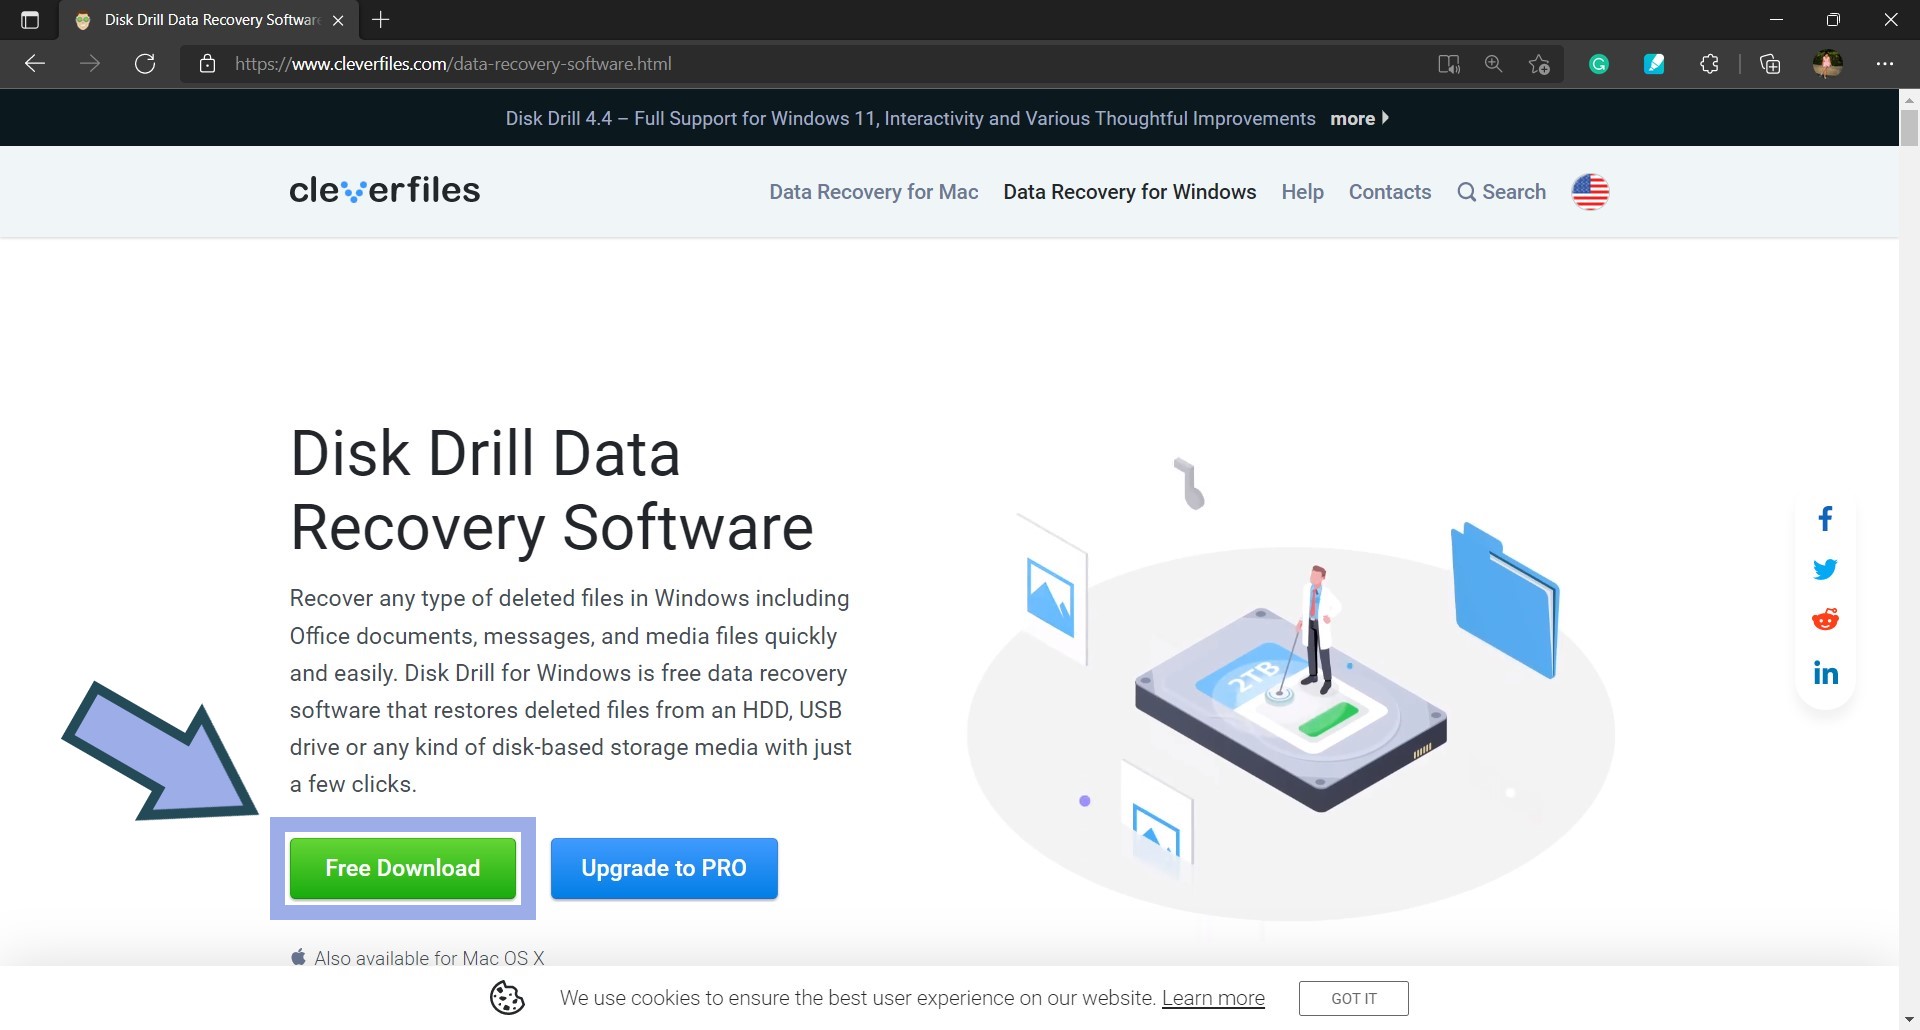 Disk Drill download page